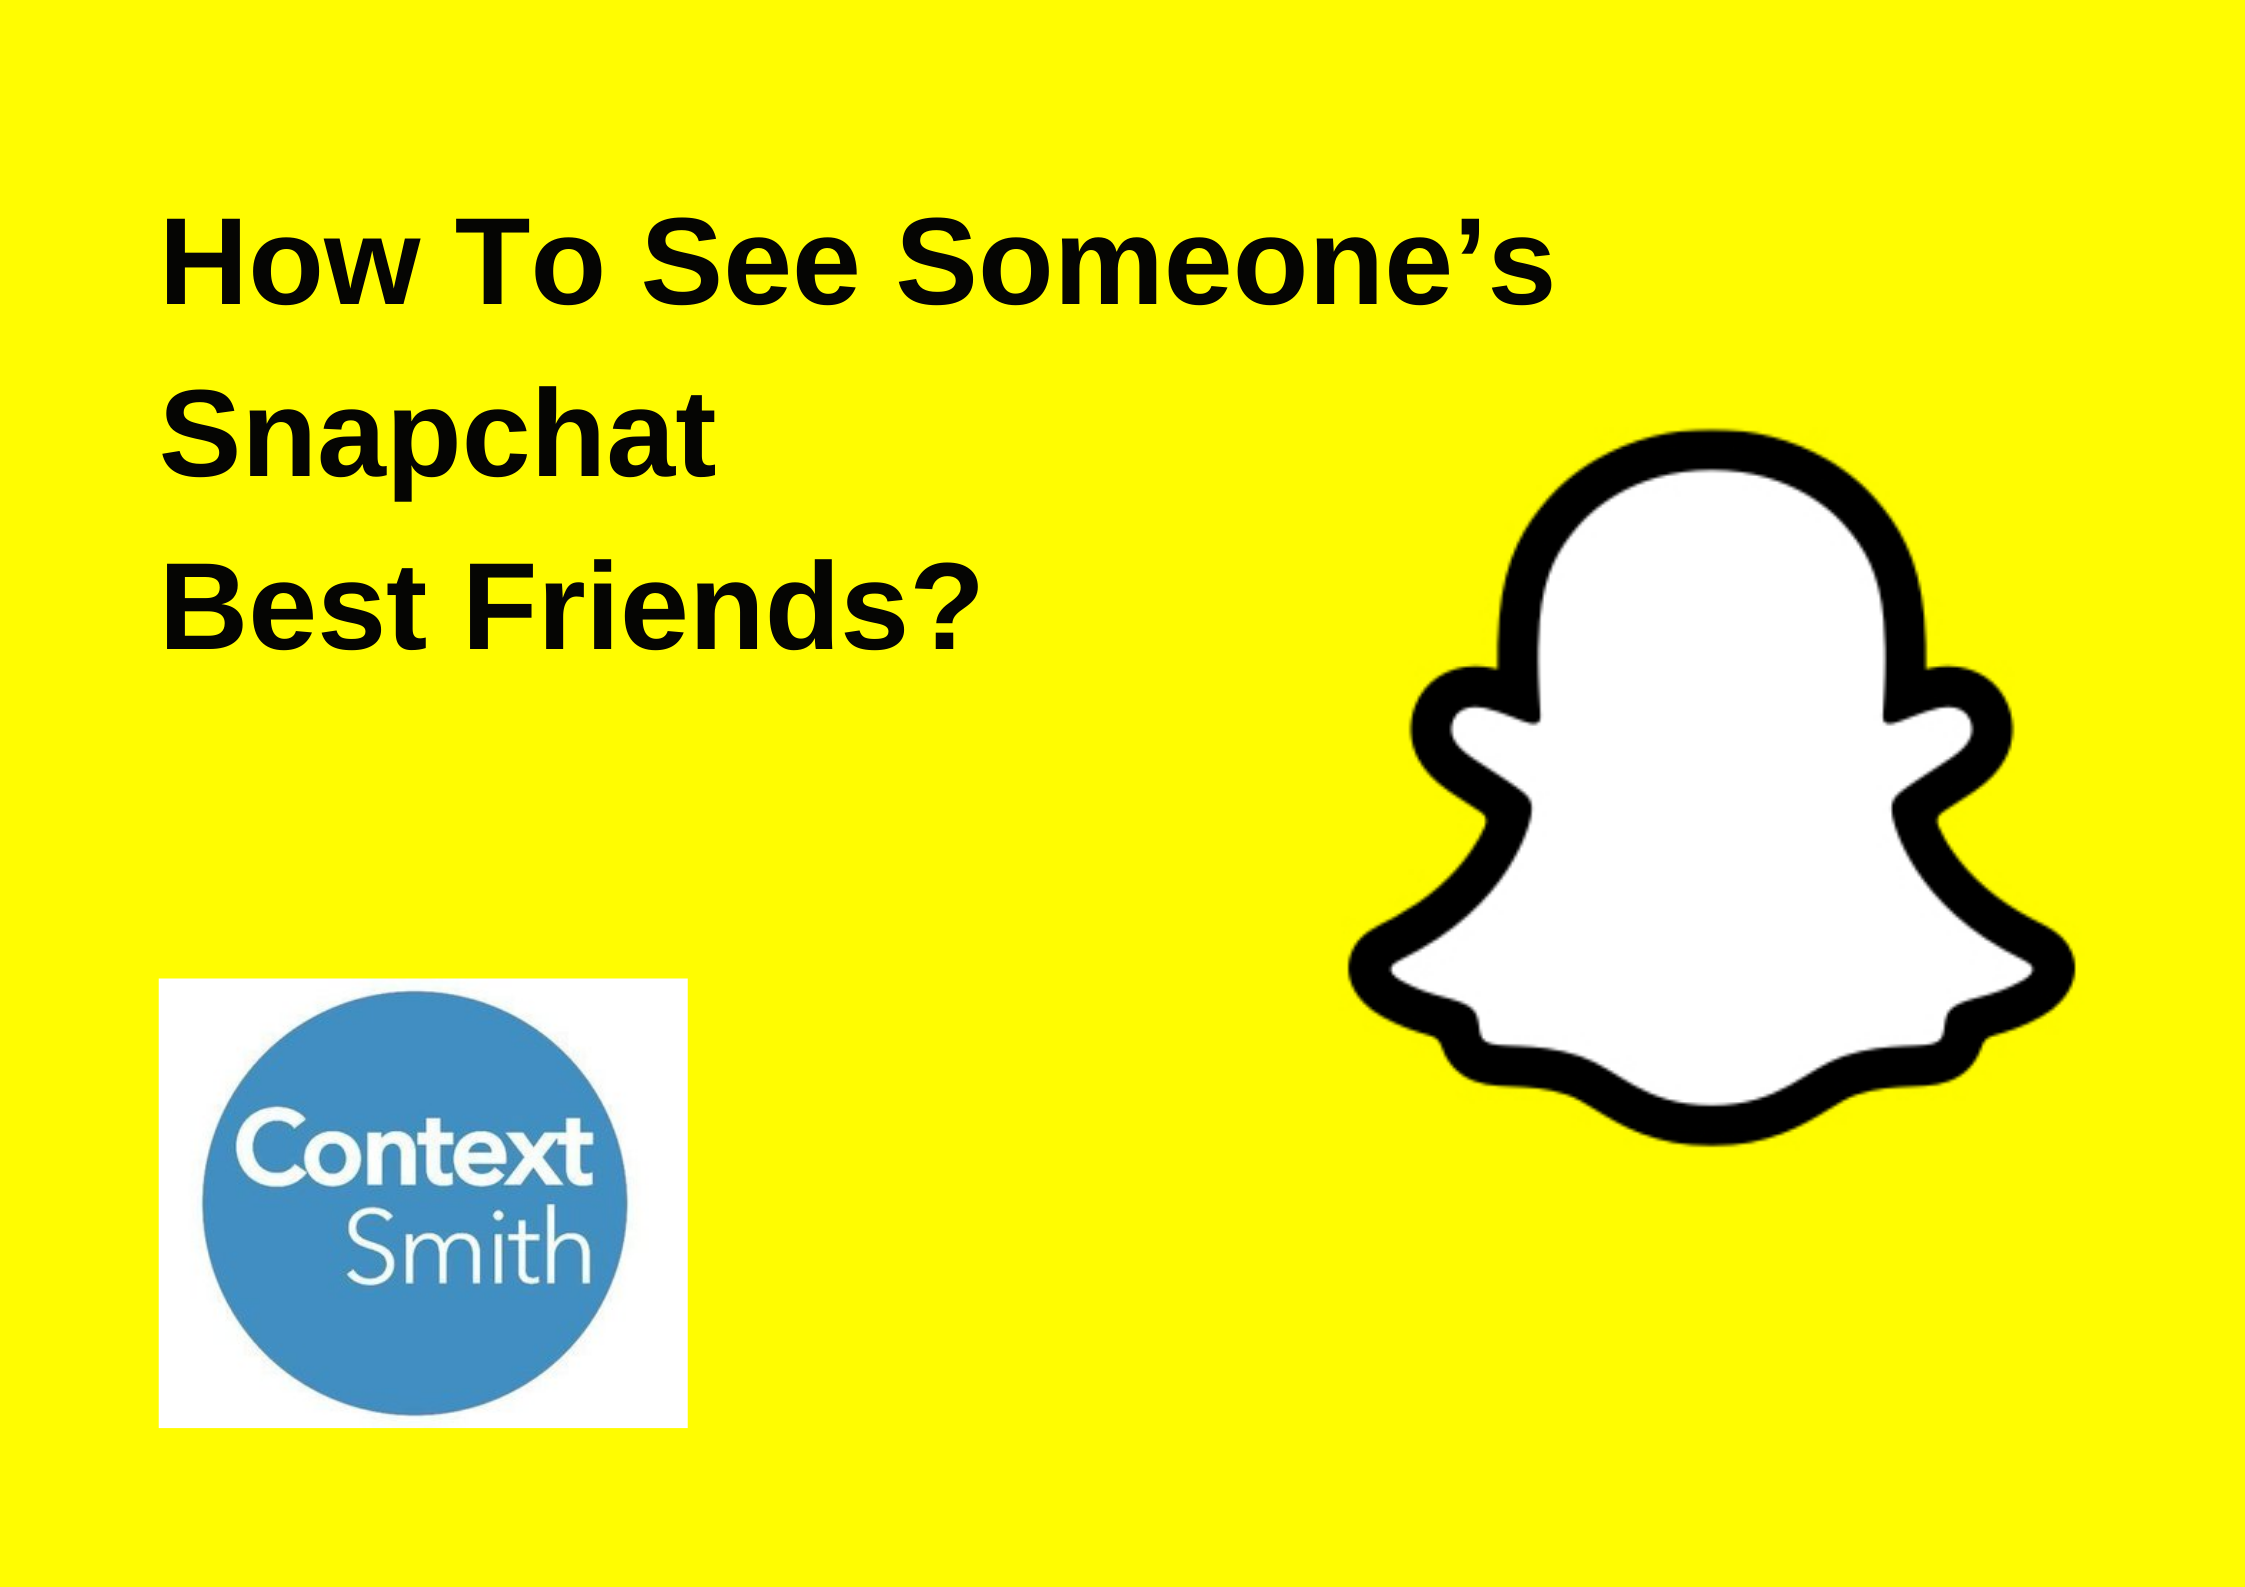 How To See Someone’s Snapchat Best Friends In 2021